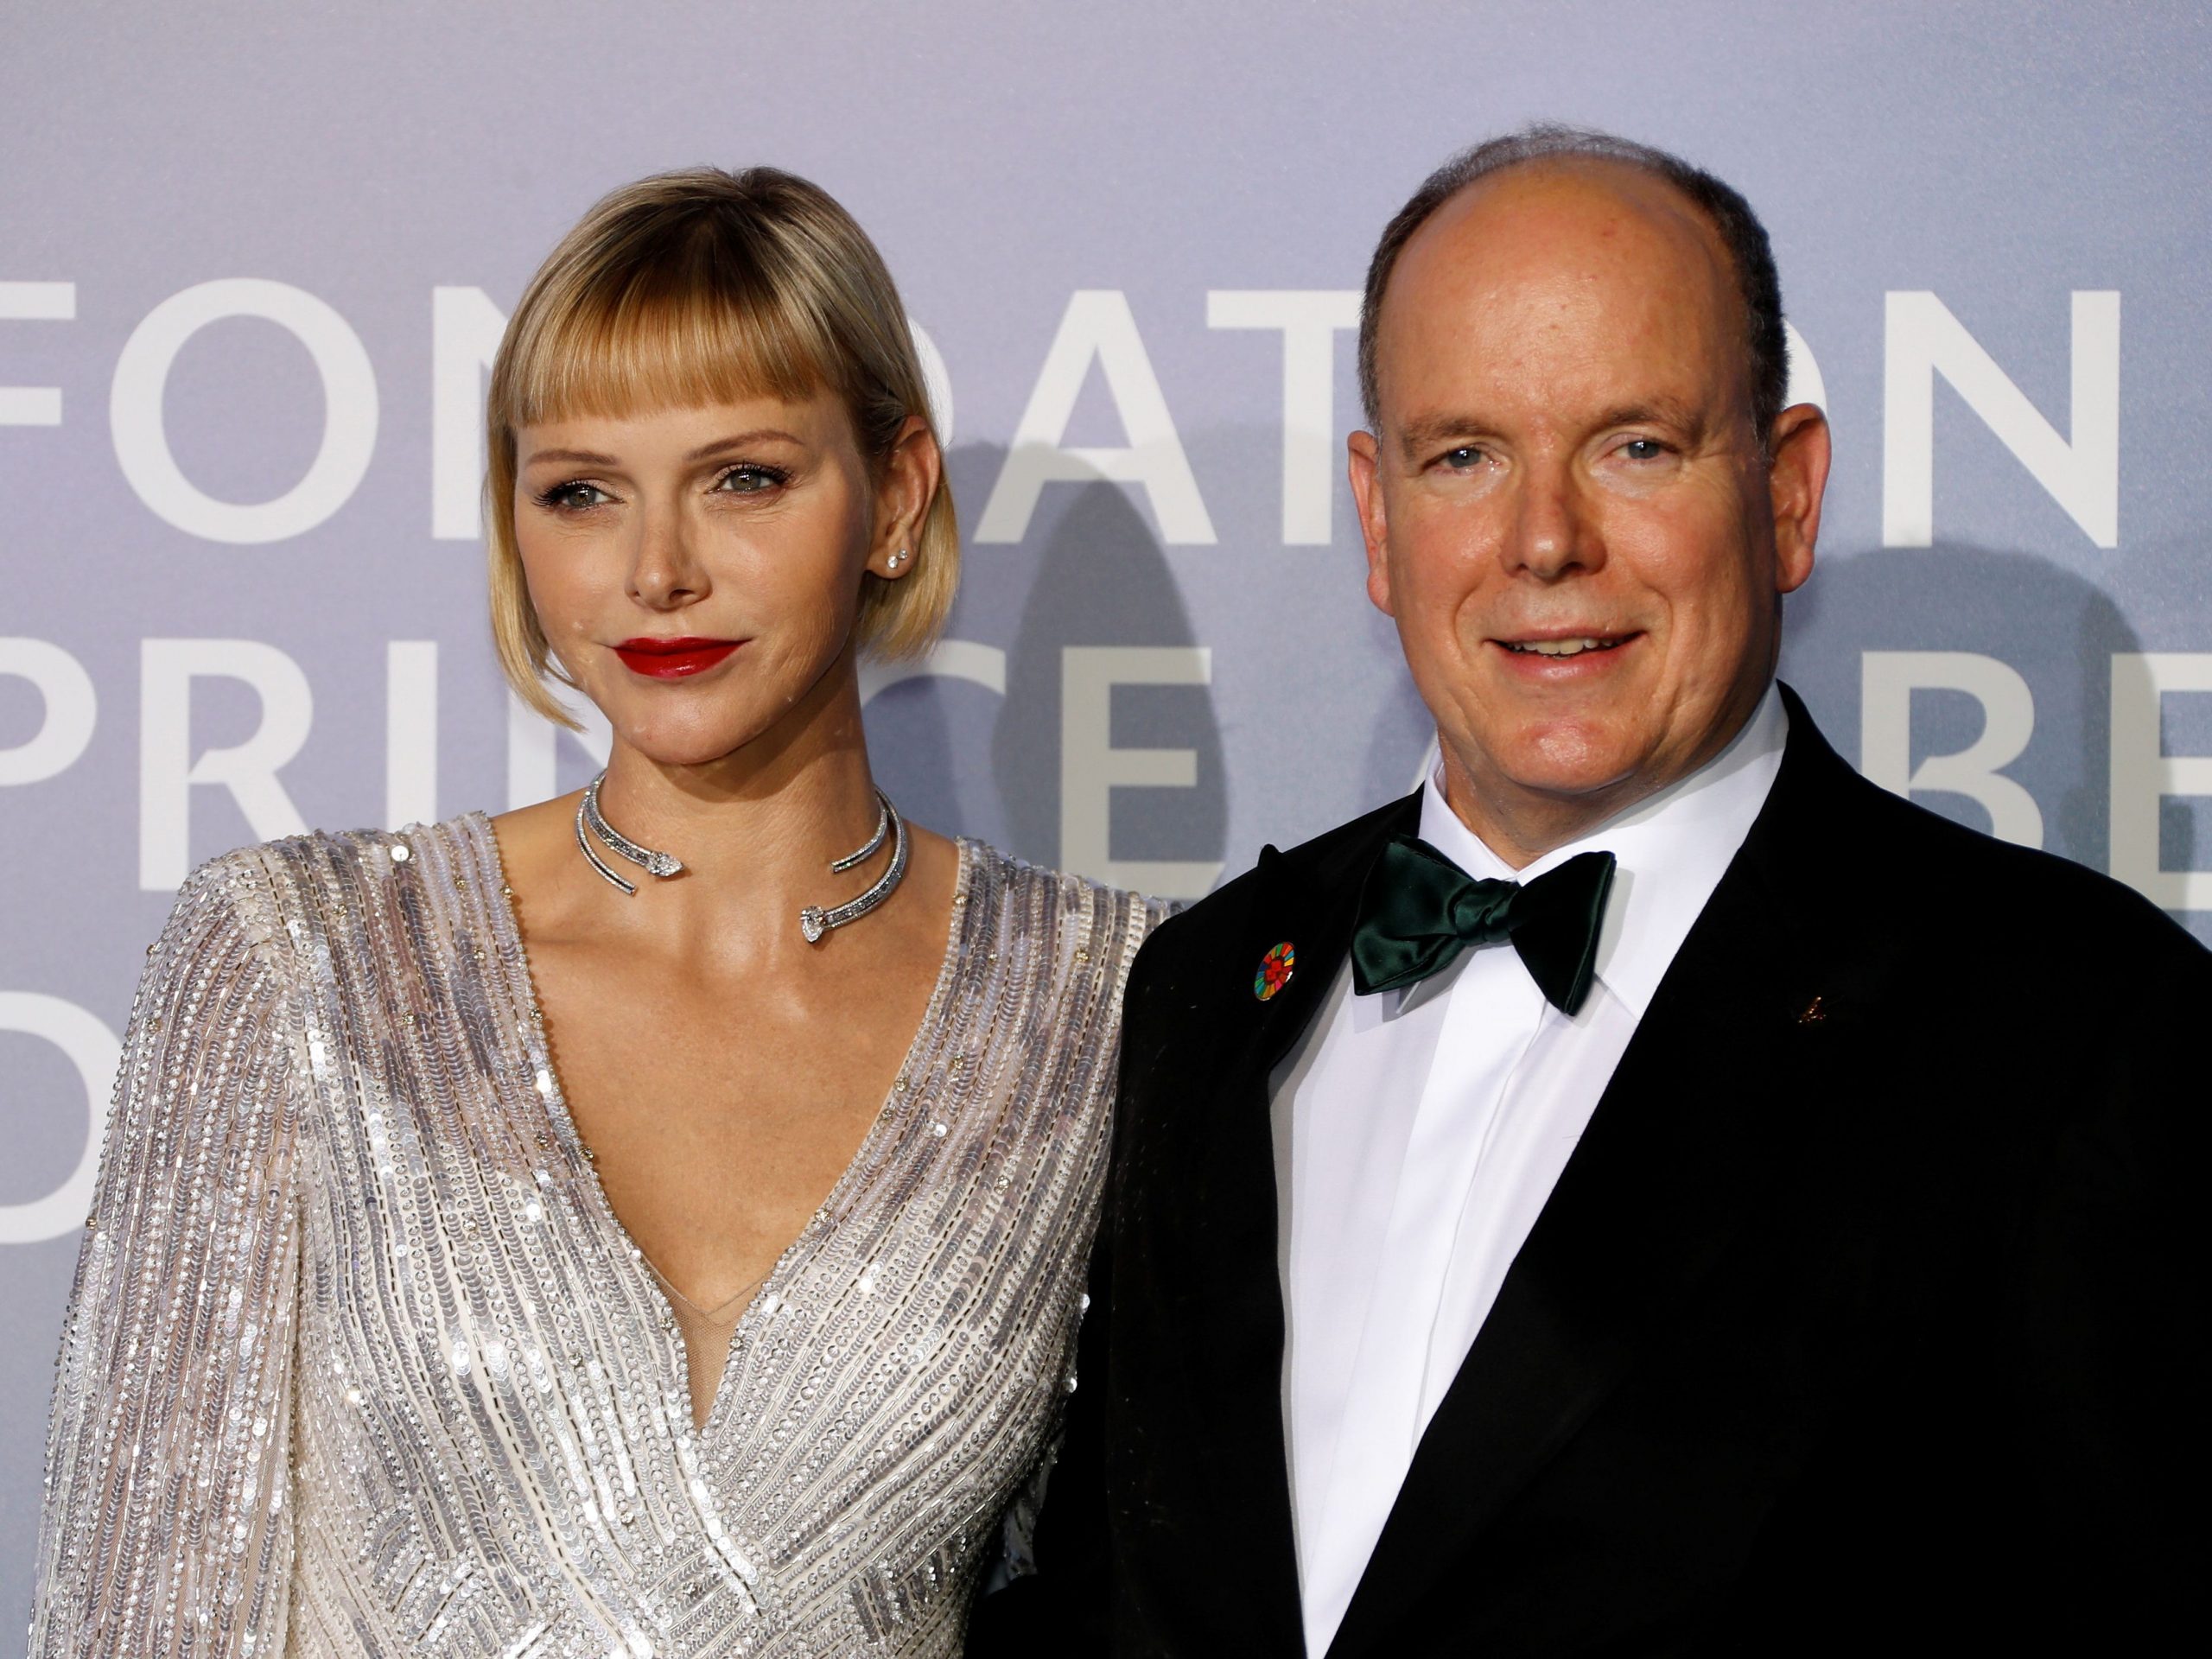 Prince Albert II of Monaco and Princess Charlene of Monaco pose on the red carpet ahead of the 2020 Monte-Carlo Gala for Planetary Health in Monaco on September 24, 2020.